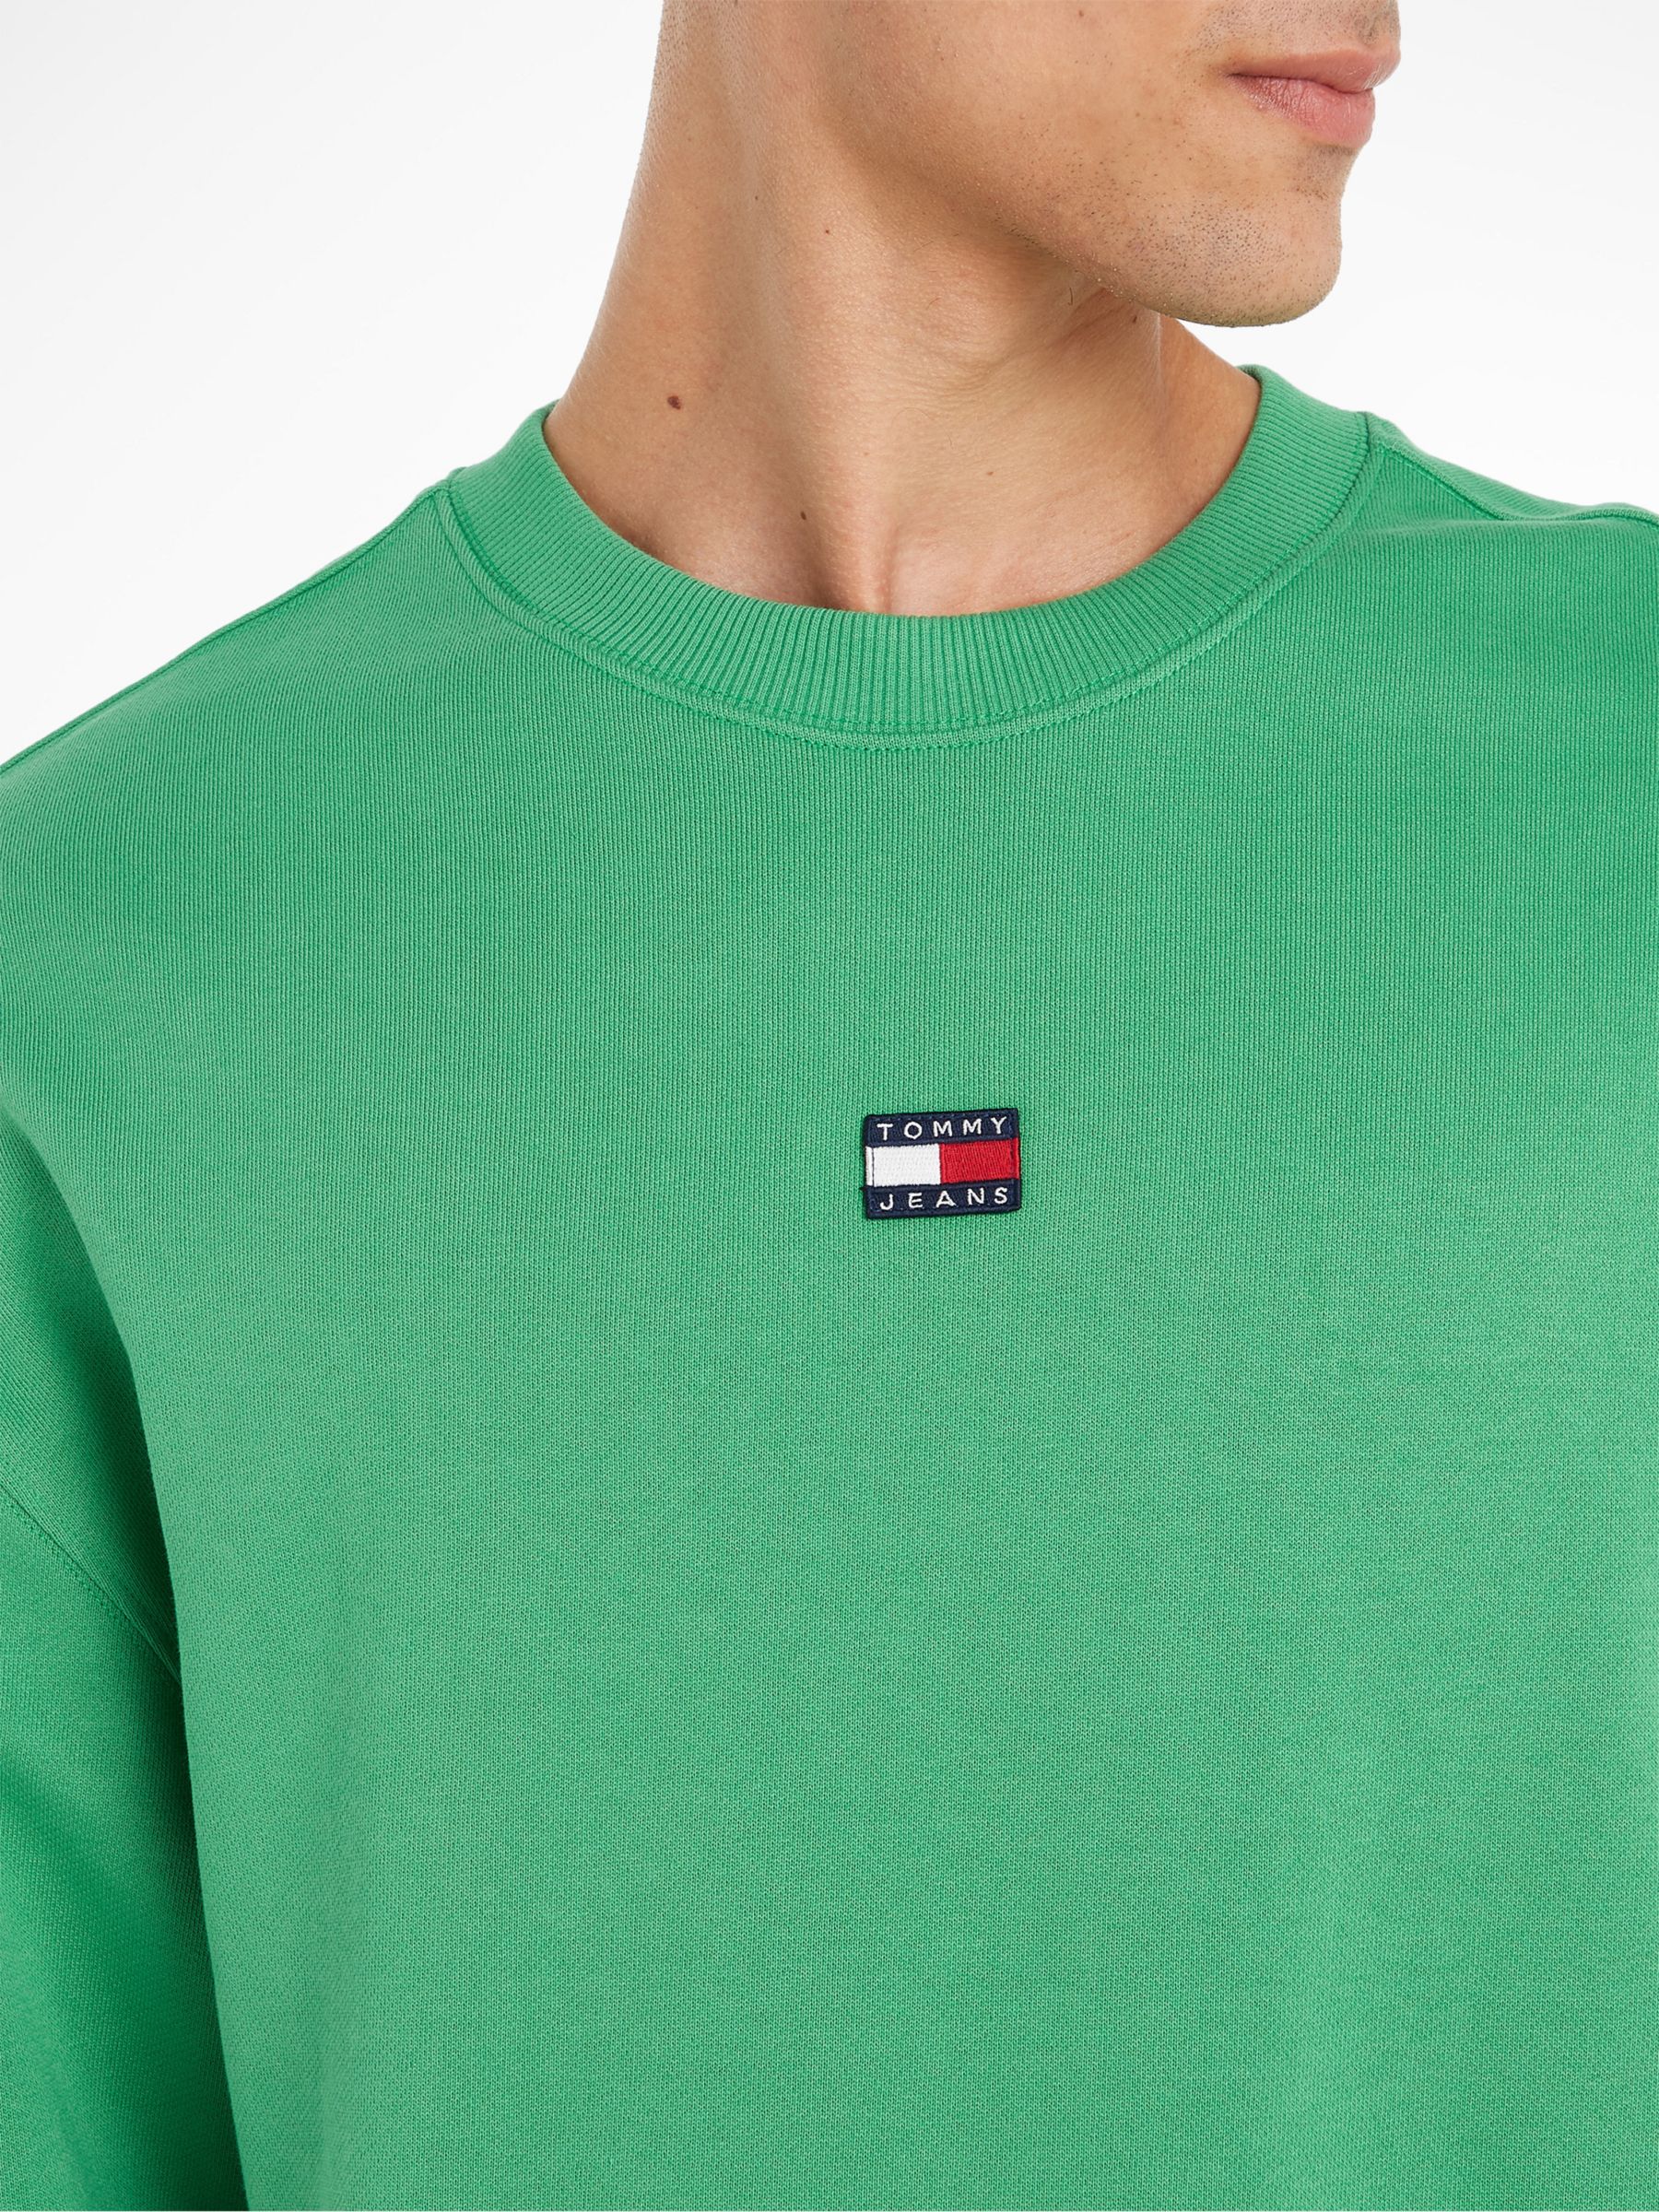 Tommy Jeans Relaxed Badge Logo Crew Neck Jumper, Coastal Green, XS